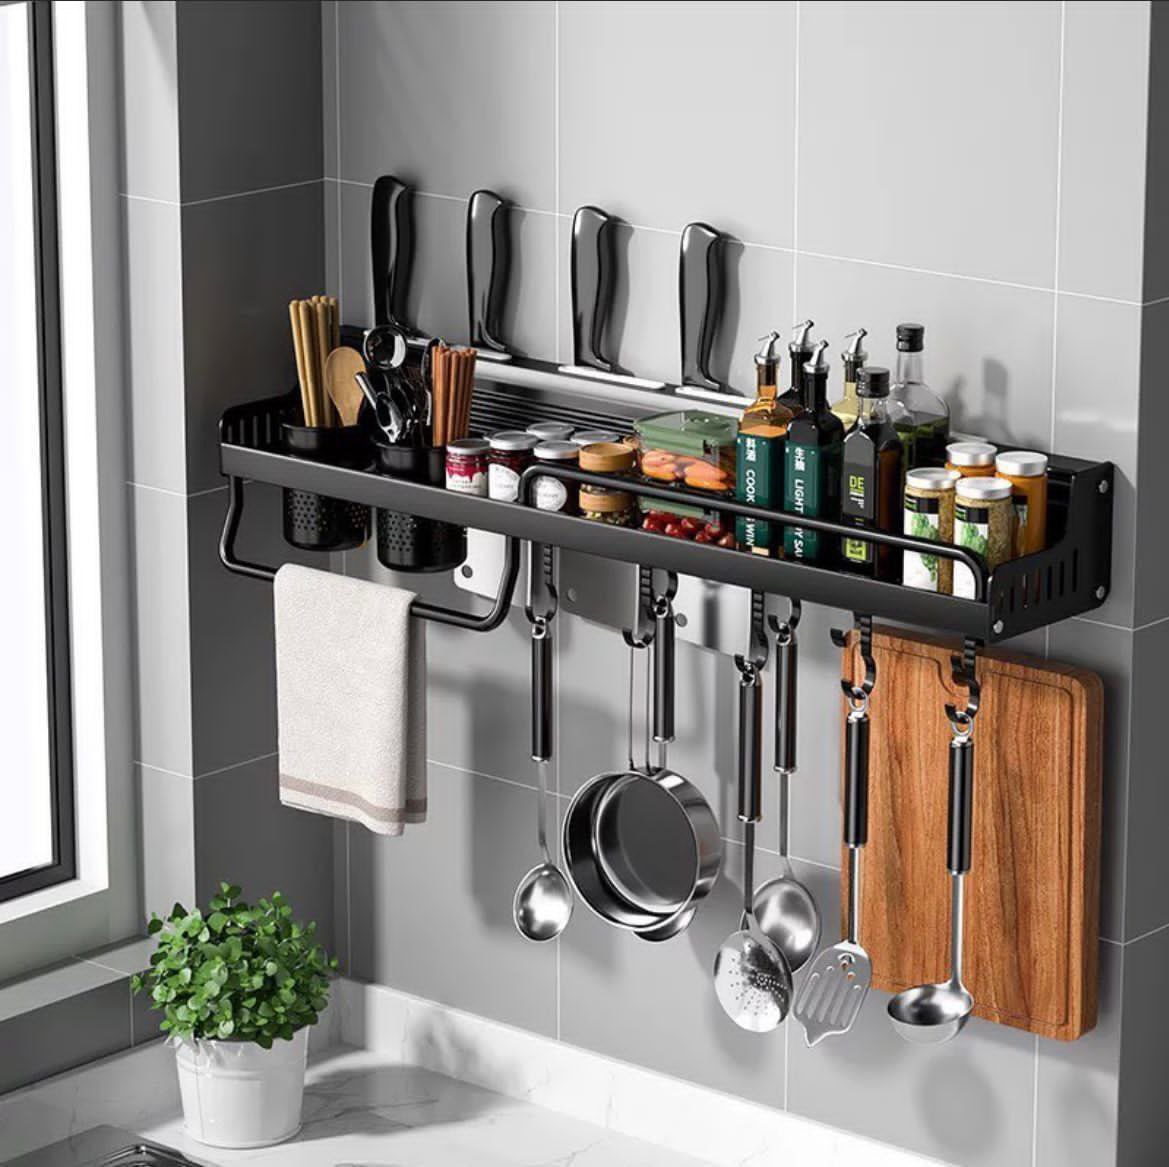 RT @HEssentia: Wall mounted kitchen organizer still available in stock. 12,000 naira only https://t.co/ehwQWcQaHH